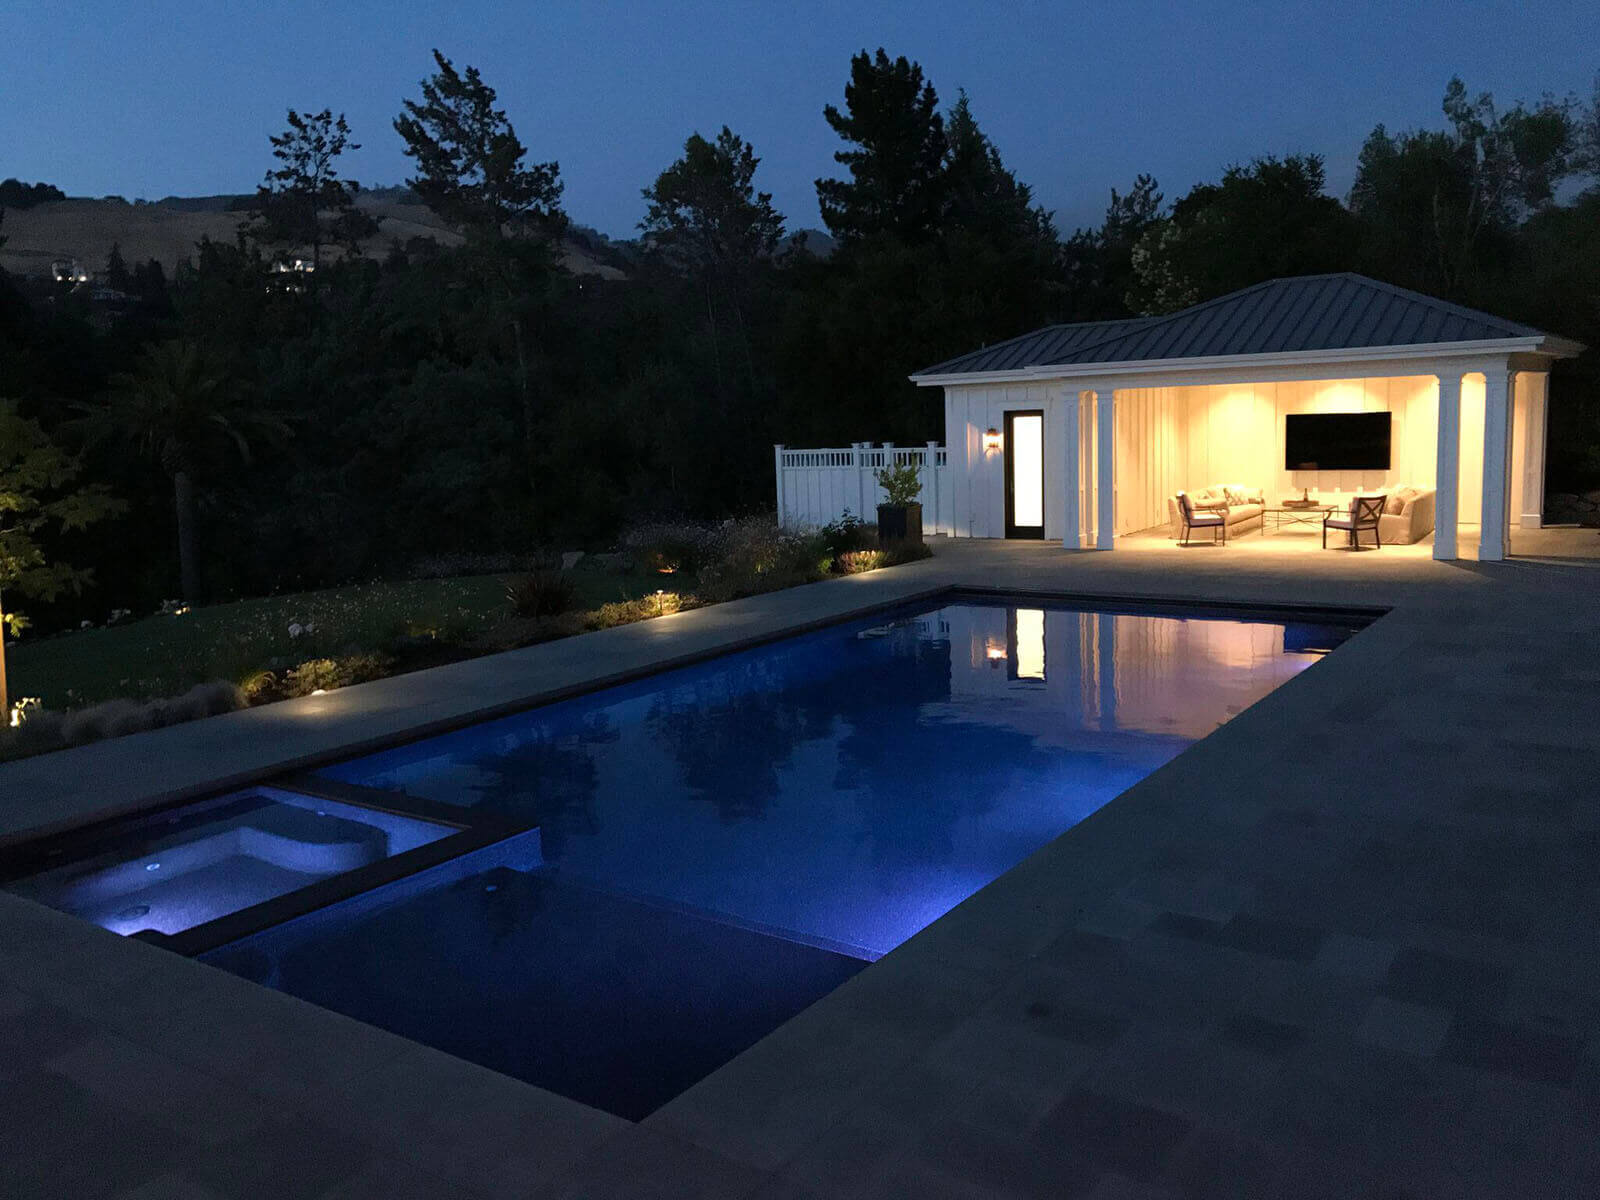 blue lit pool with well-lit covered veranda and accent lighting on the side